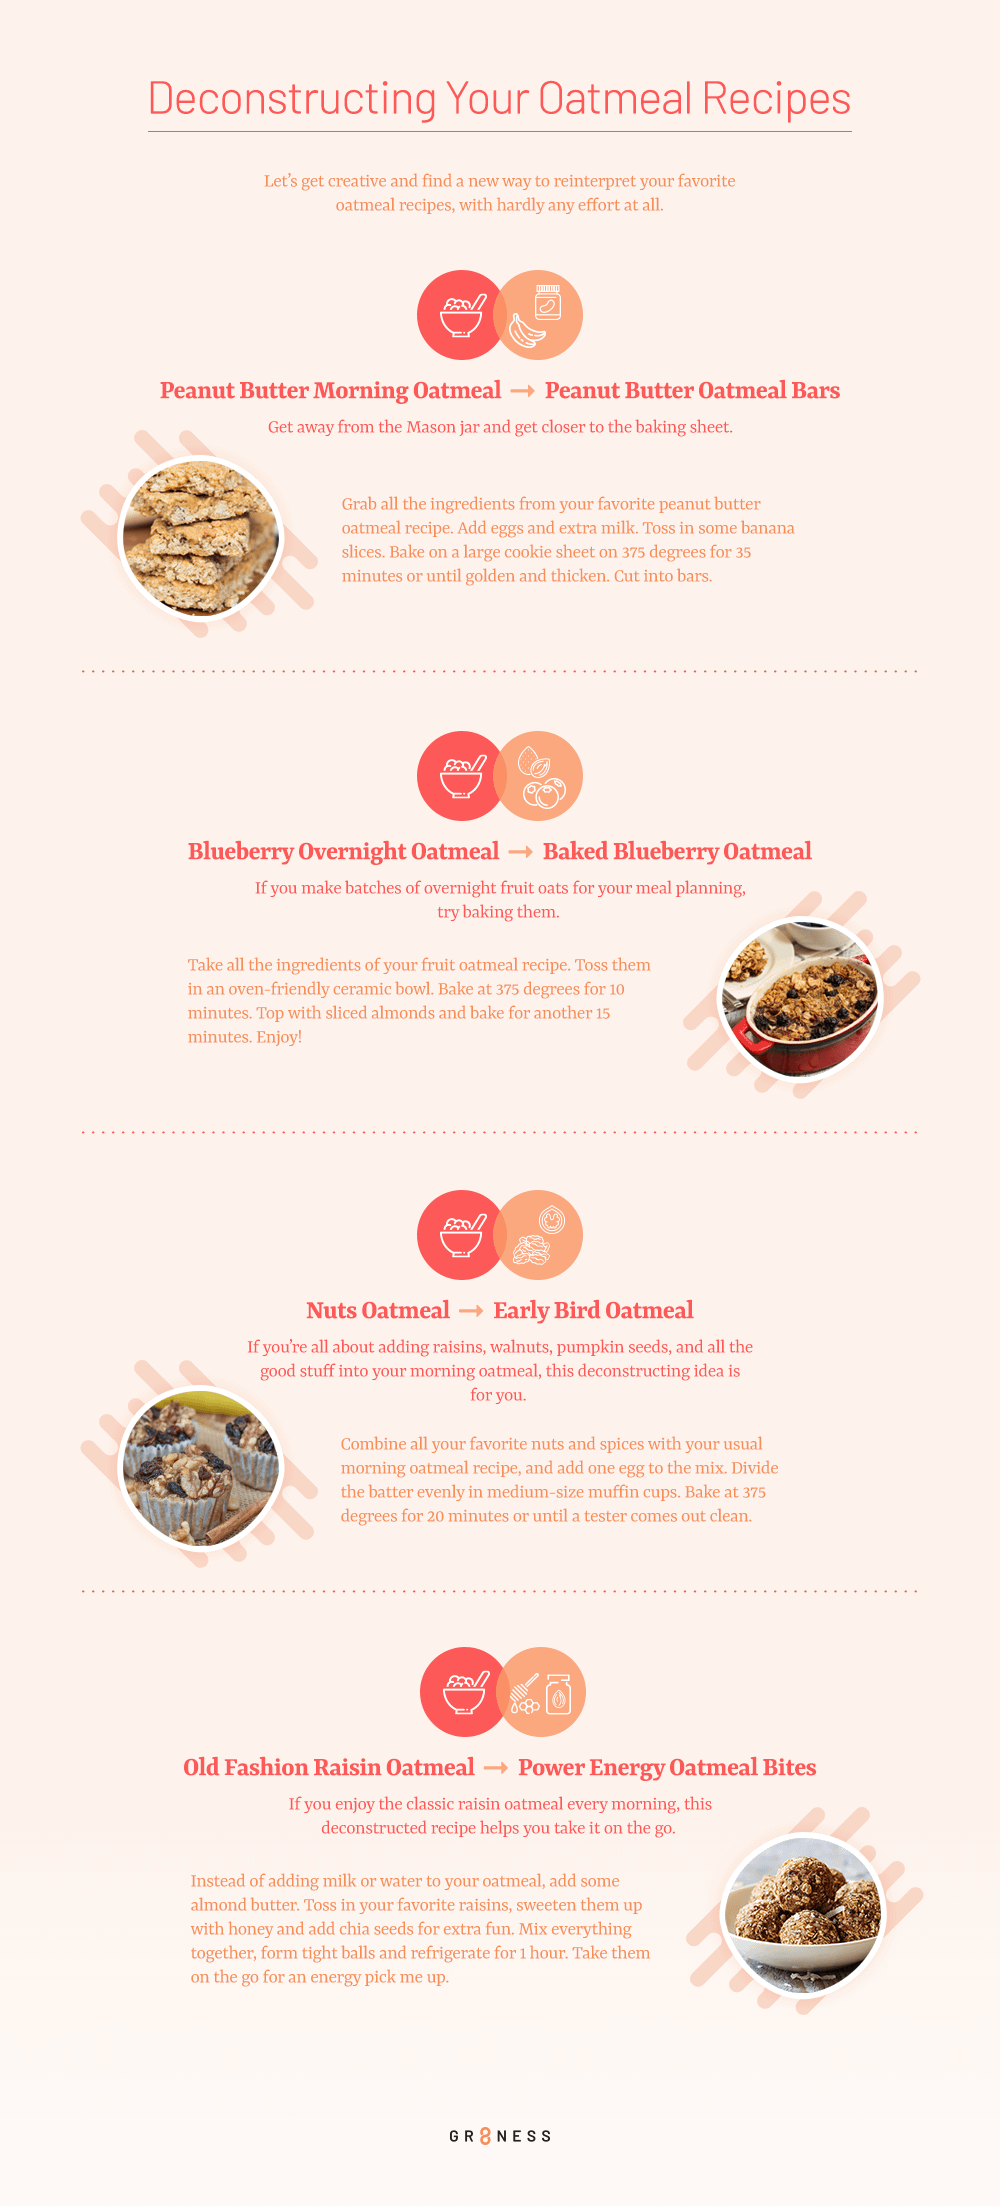 An infographic deconstructing your oatmeal recipes